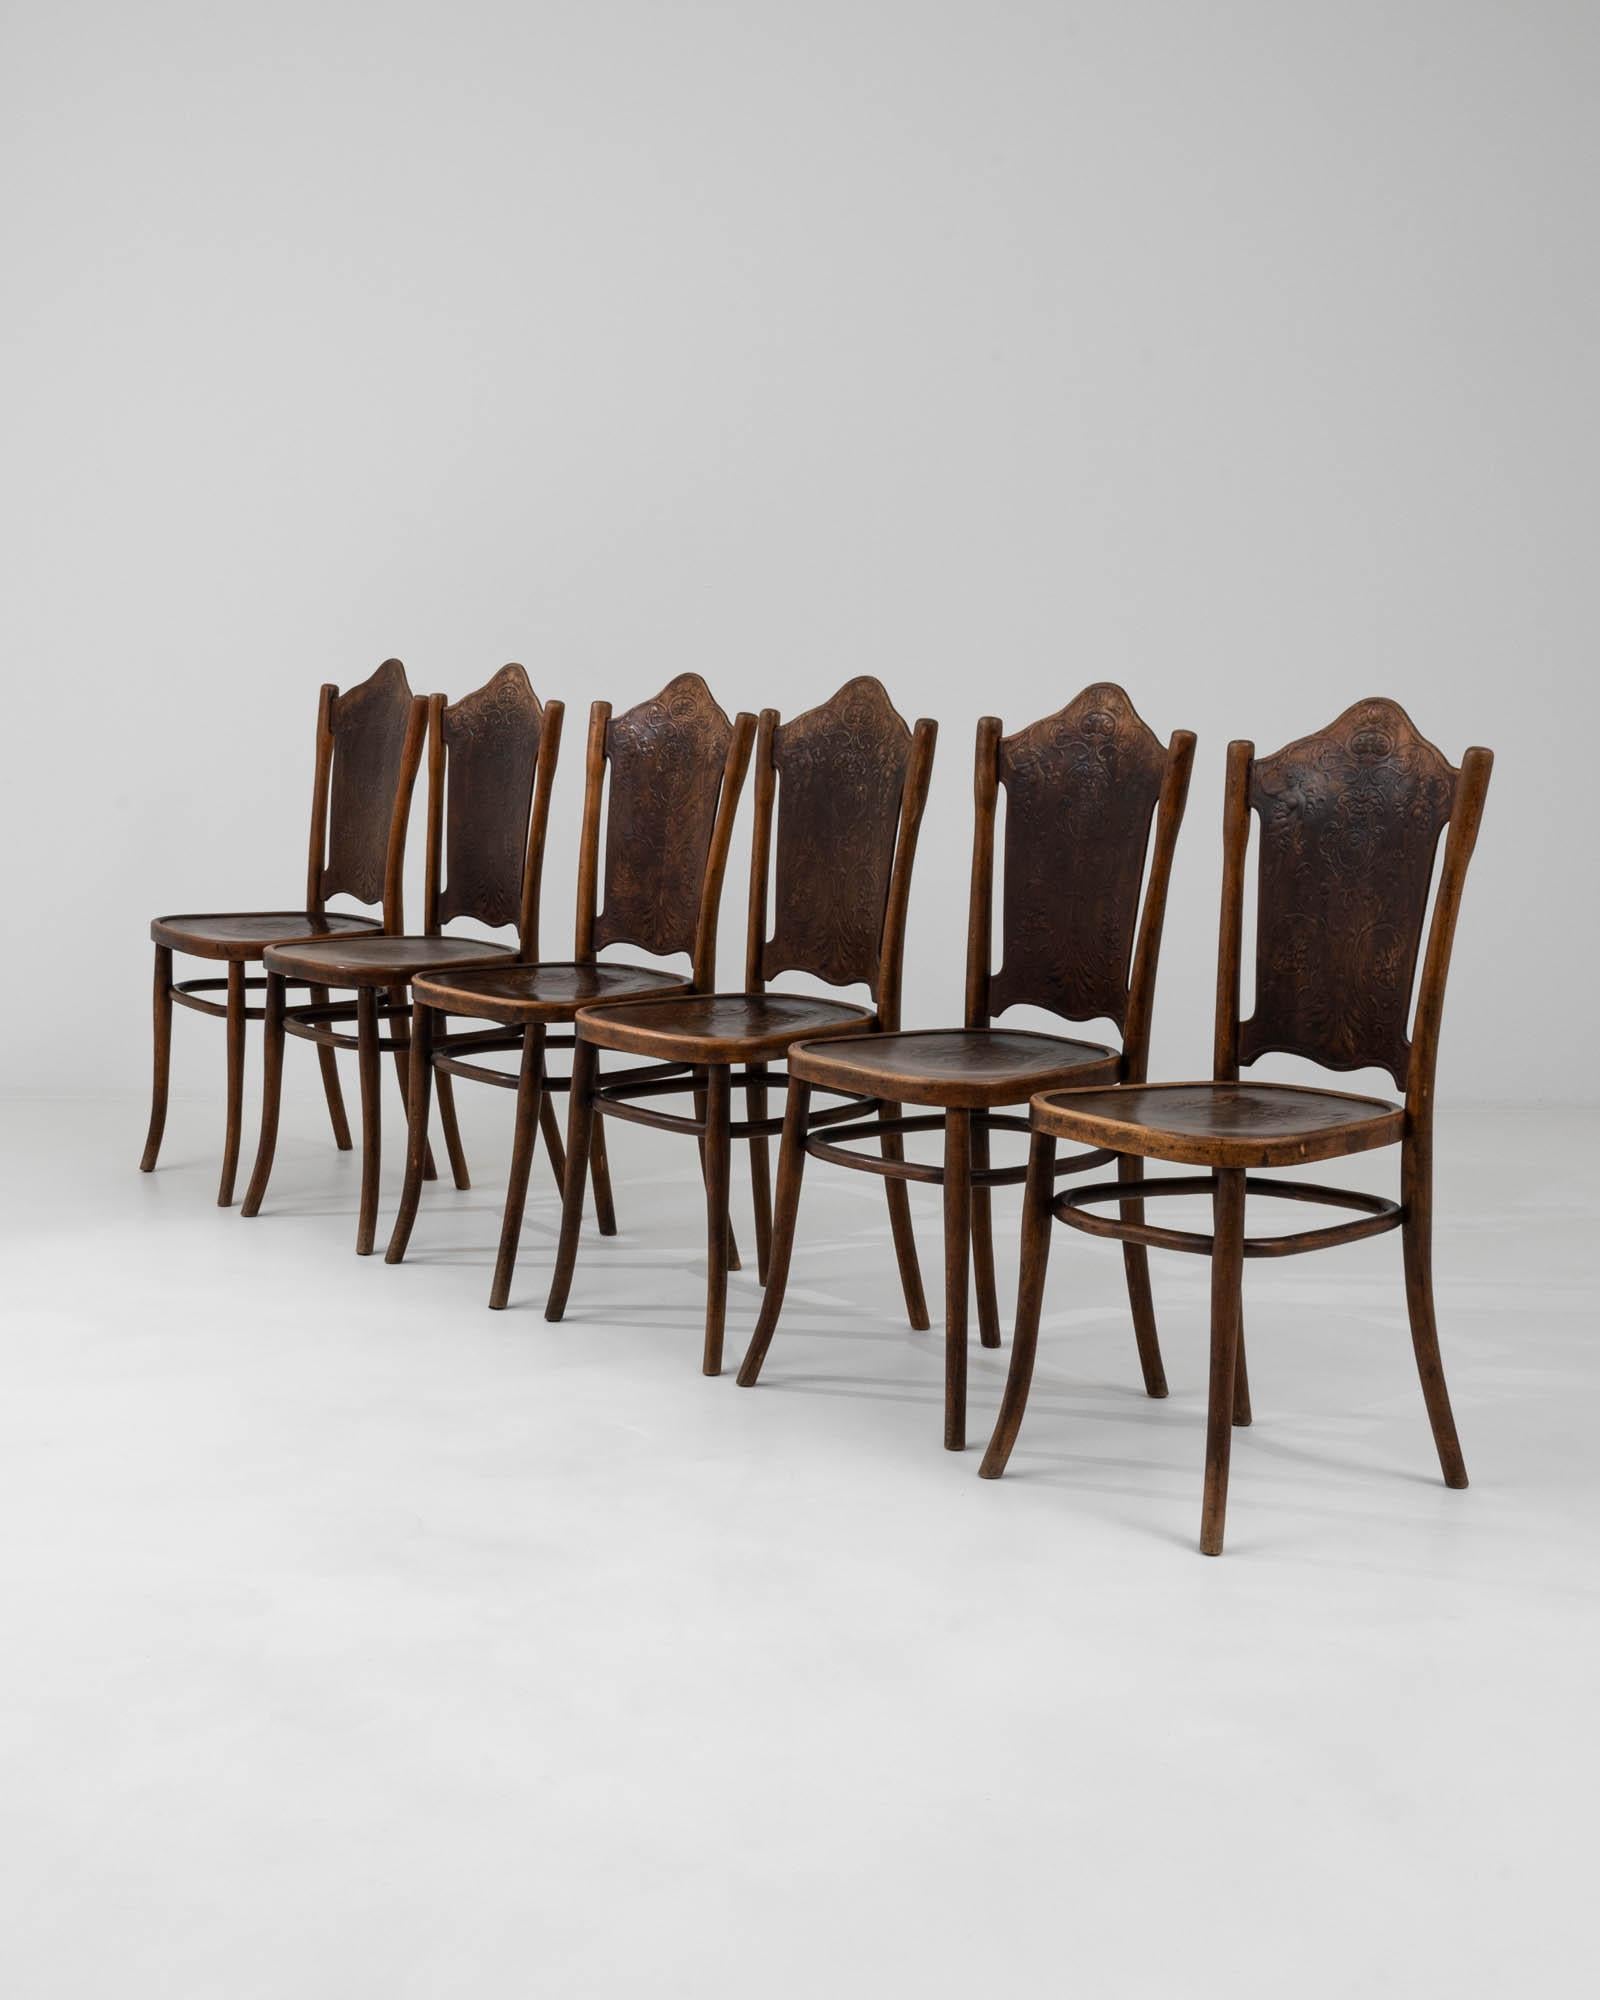 1910s Austrian Wooden Dining Chairs By Thonet, Set of 6 For Sale 5